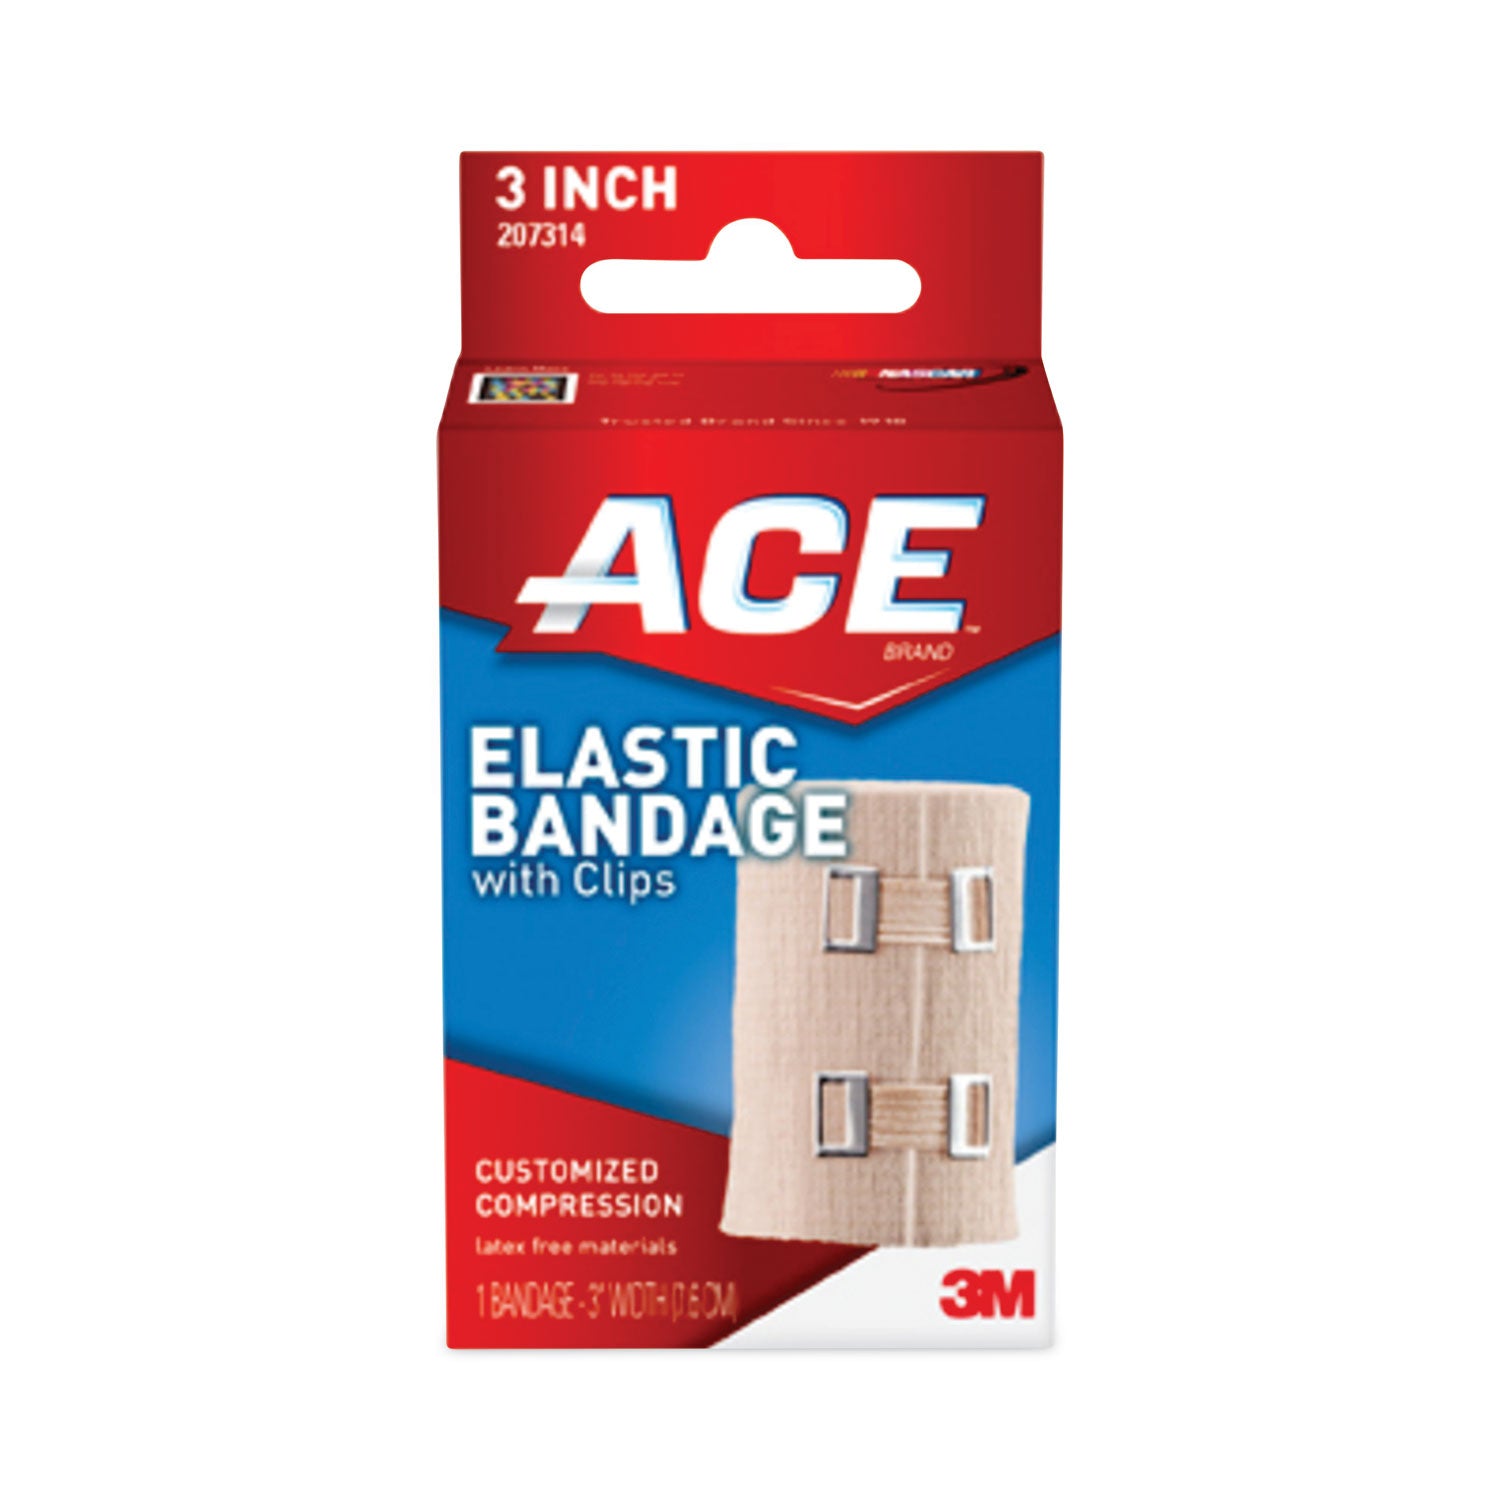 Elastic Bandage with E-Z Clips, 3 x 64 - 